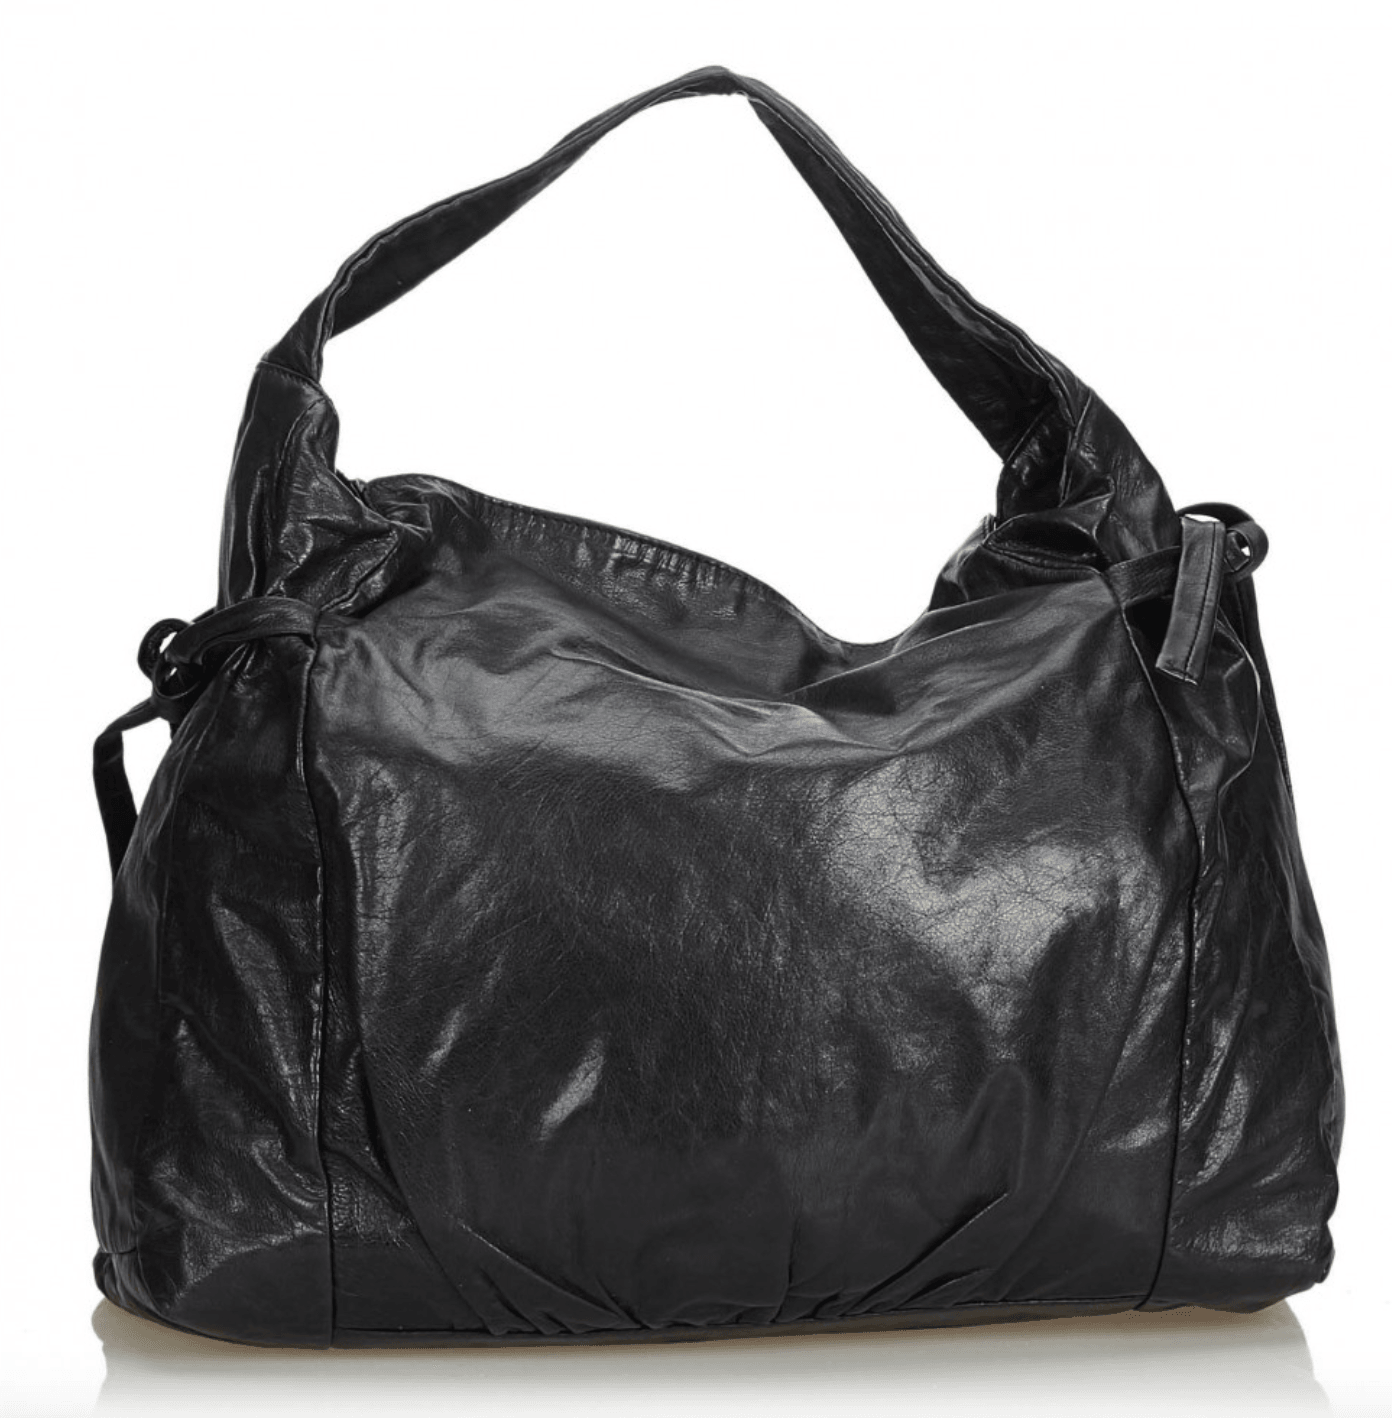 Hysteria Slouch Leather Handbag - Endless